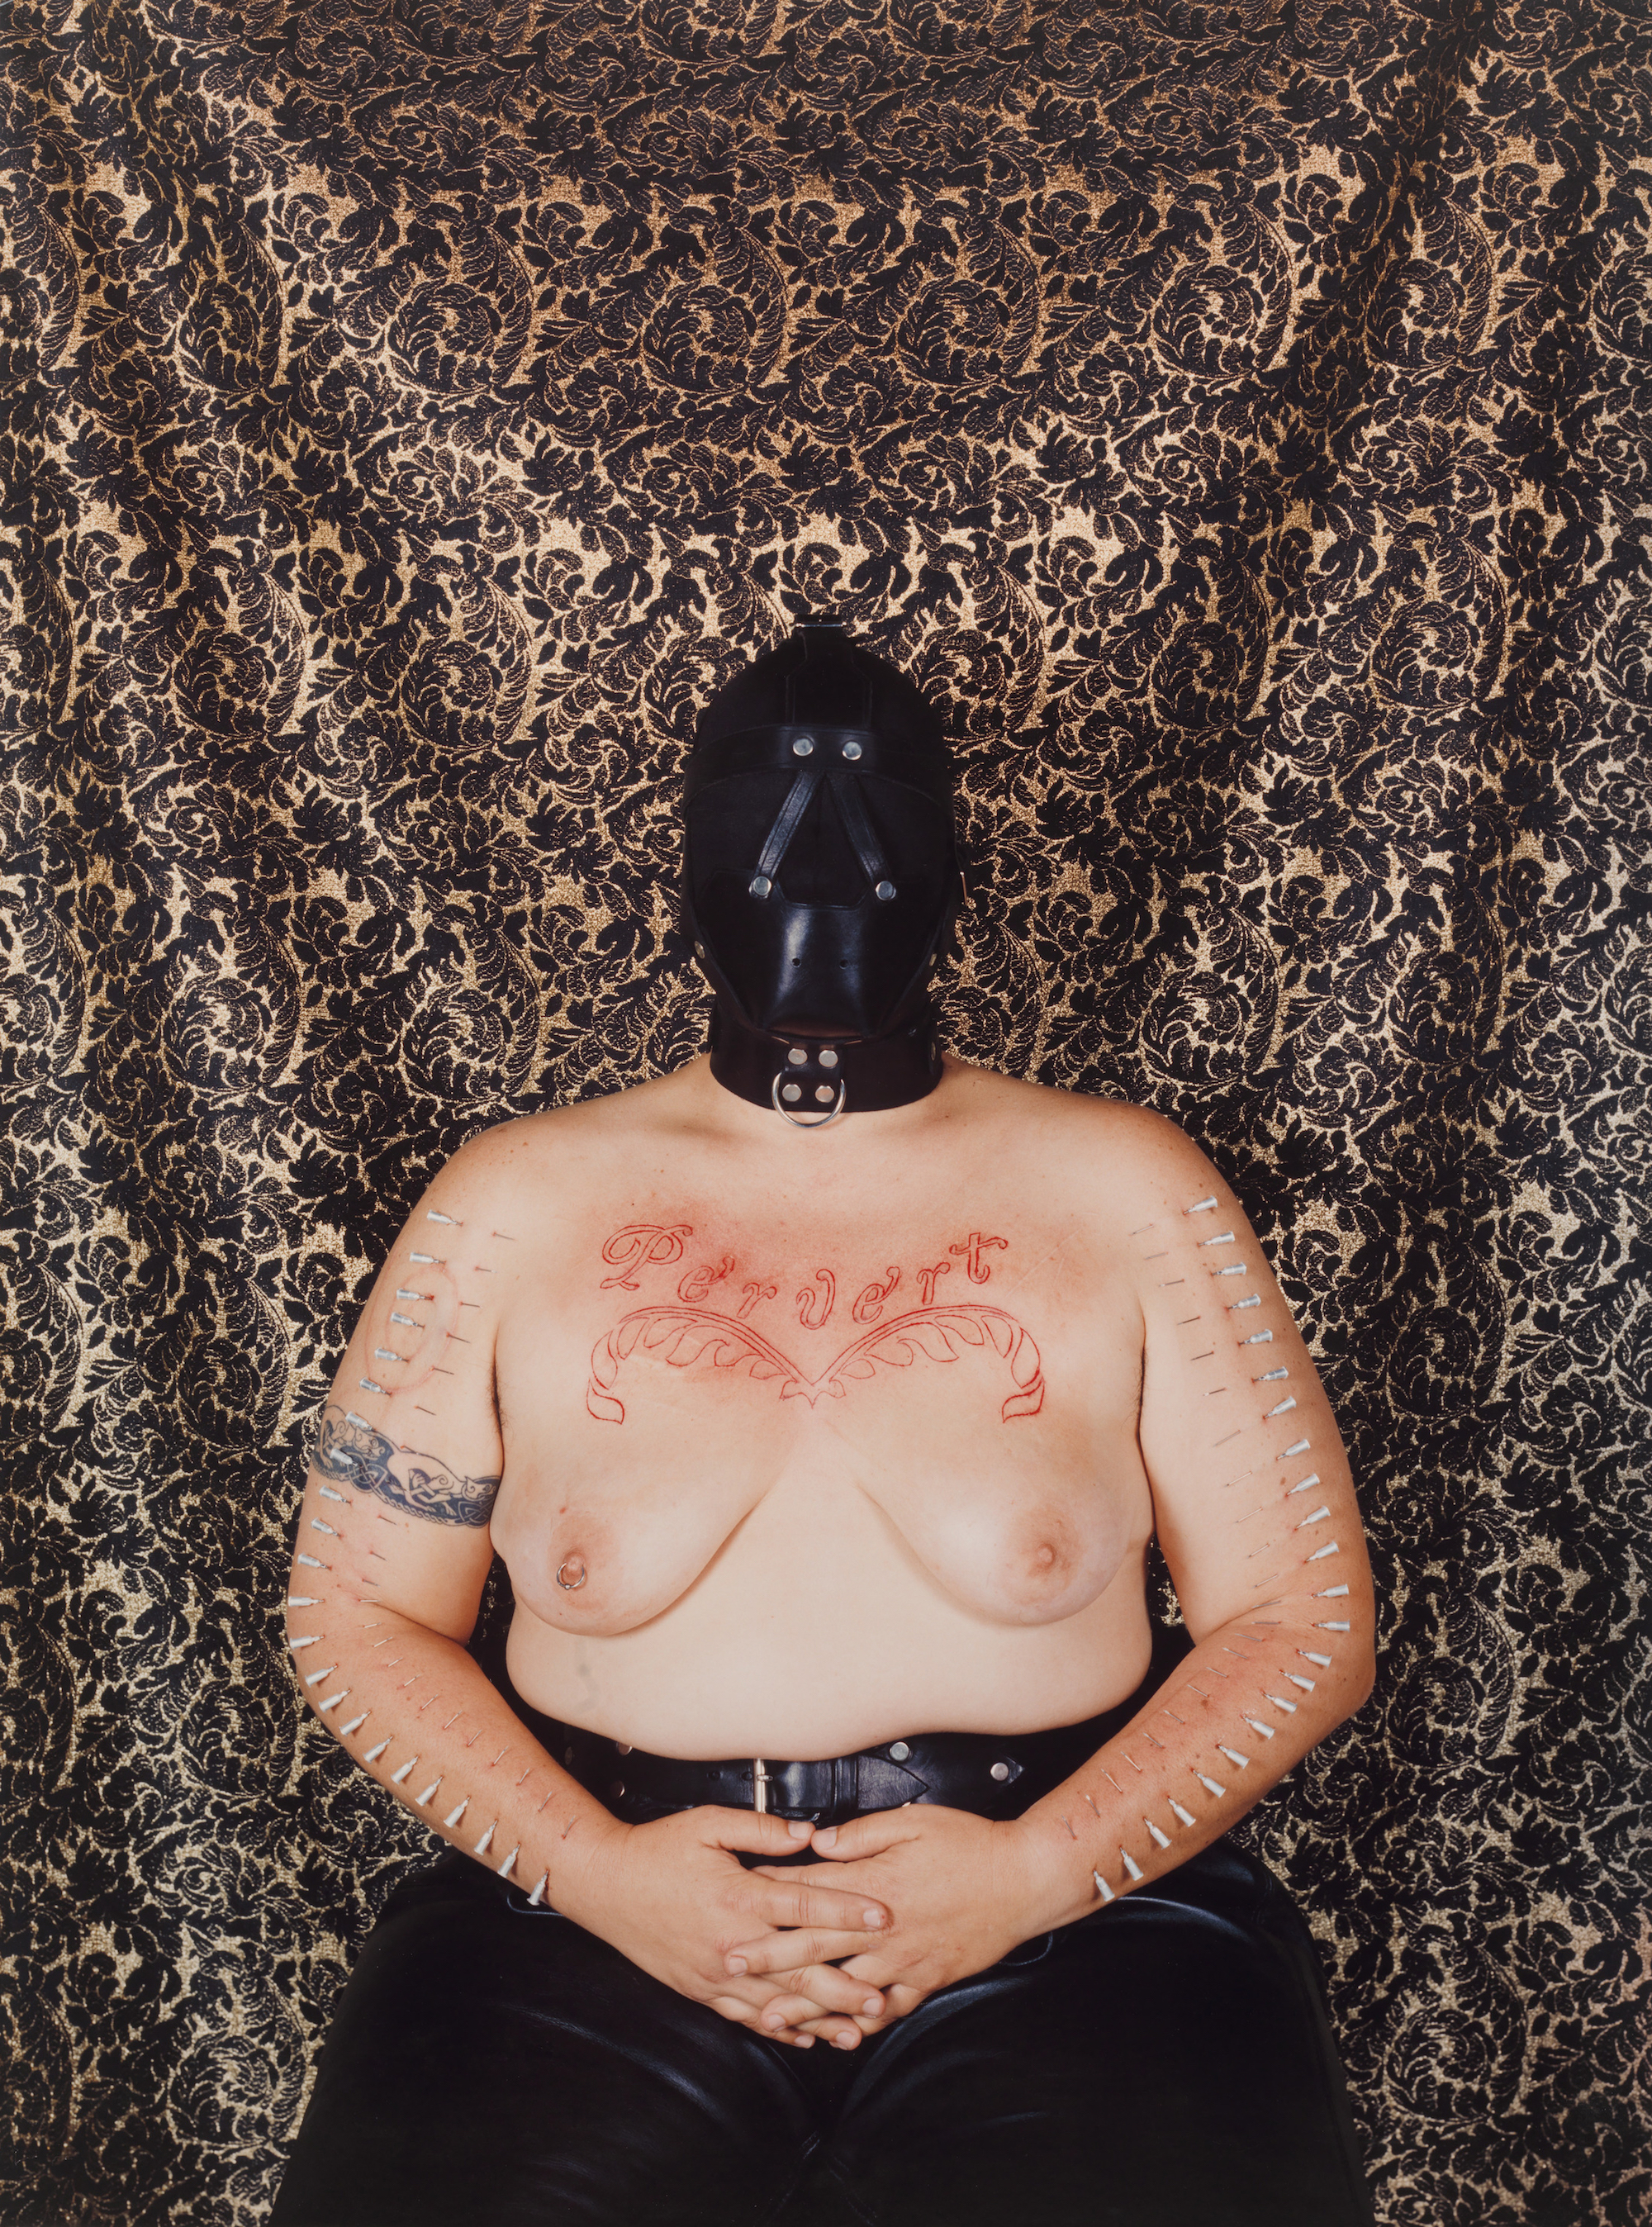 Catherine Opie, Self-Portrait/Pervert, 1994. Courtesy Solomon R. Guggenheim Museum, New York. Purchased with funds contributed by the Photography Committee, 2003 © Catherine Opie